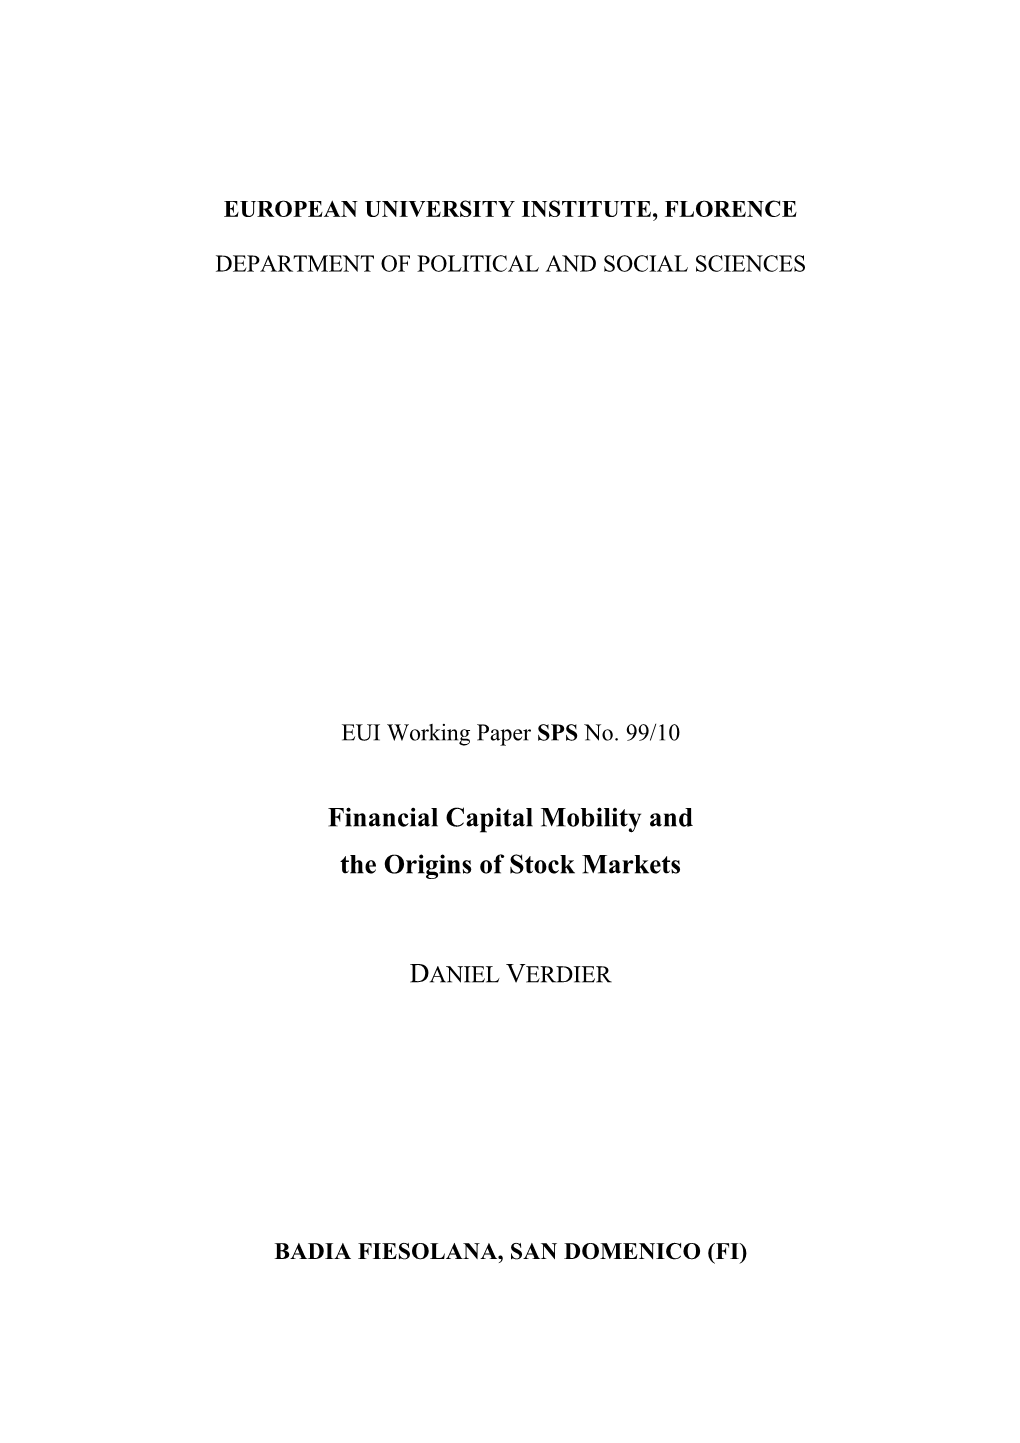 Financial Capital Mobility and the Origins of Stock Markets